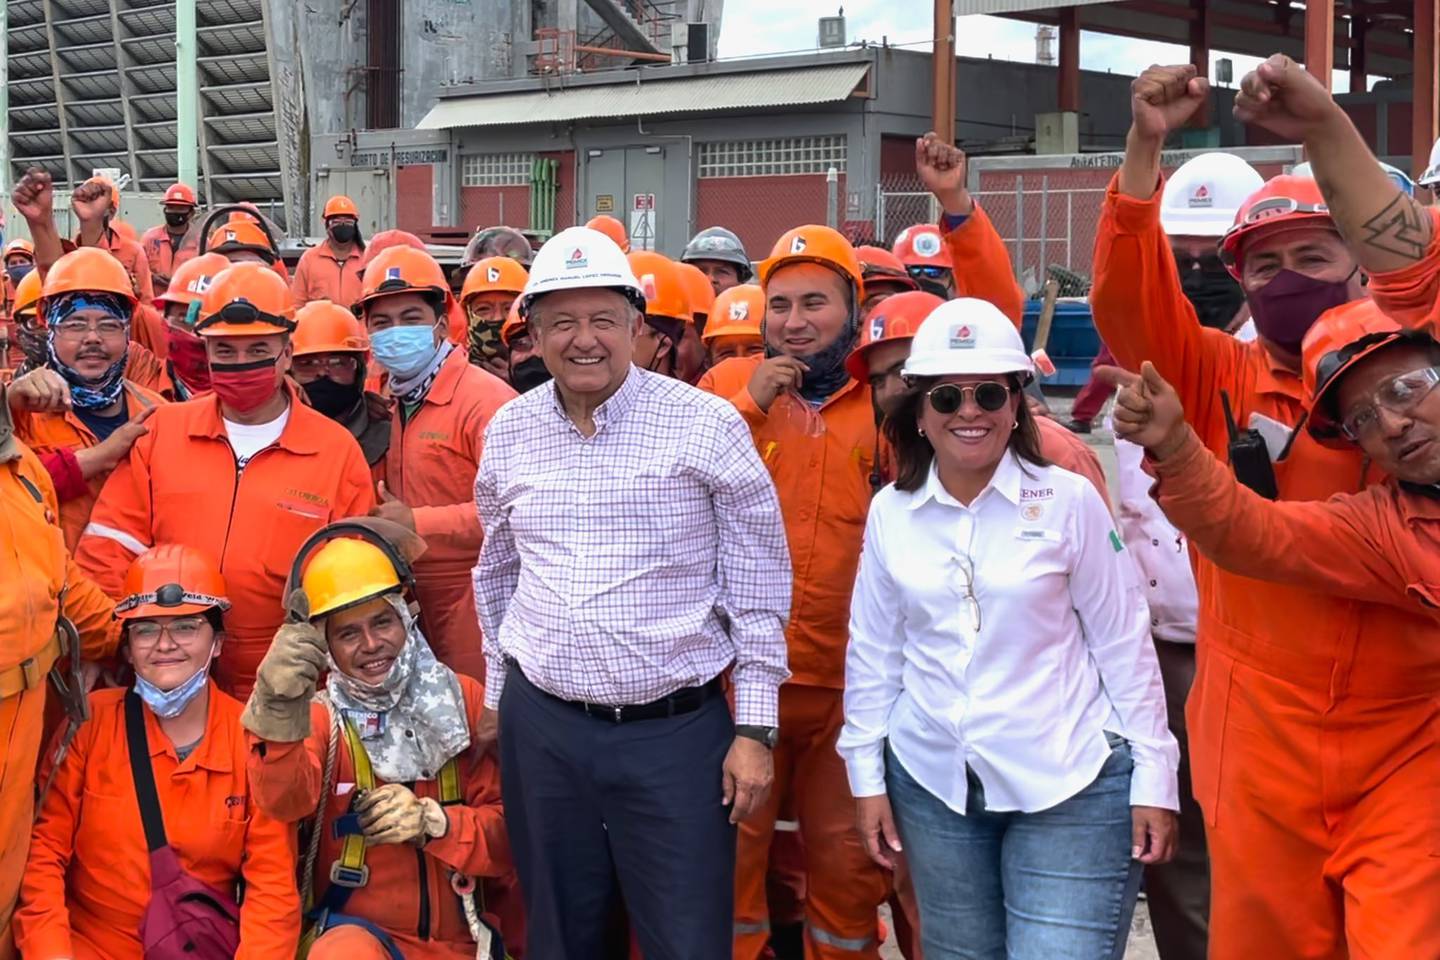 Mexican Presiden Andrés Manuel López Obrador with Energy Minister Rocío Nahle and workers at the Dos Bocas refinery in Tabasco state.